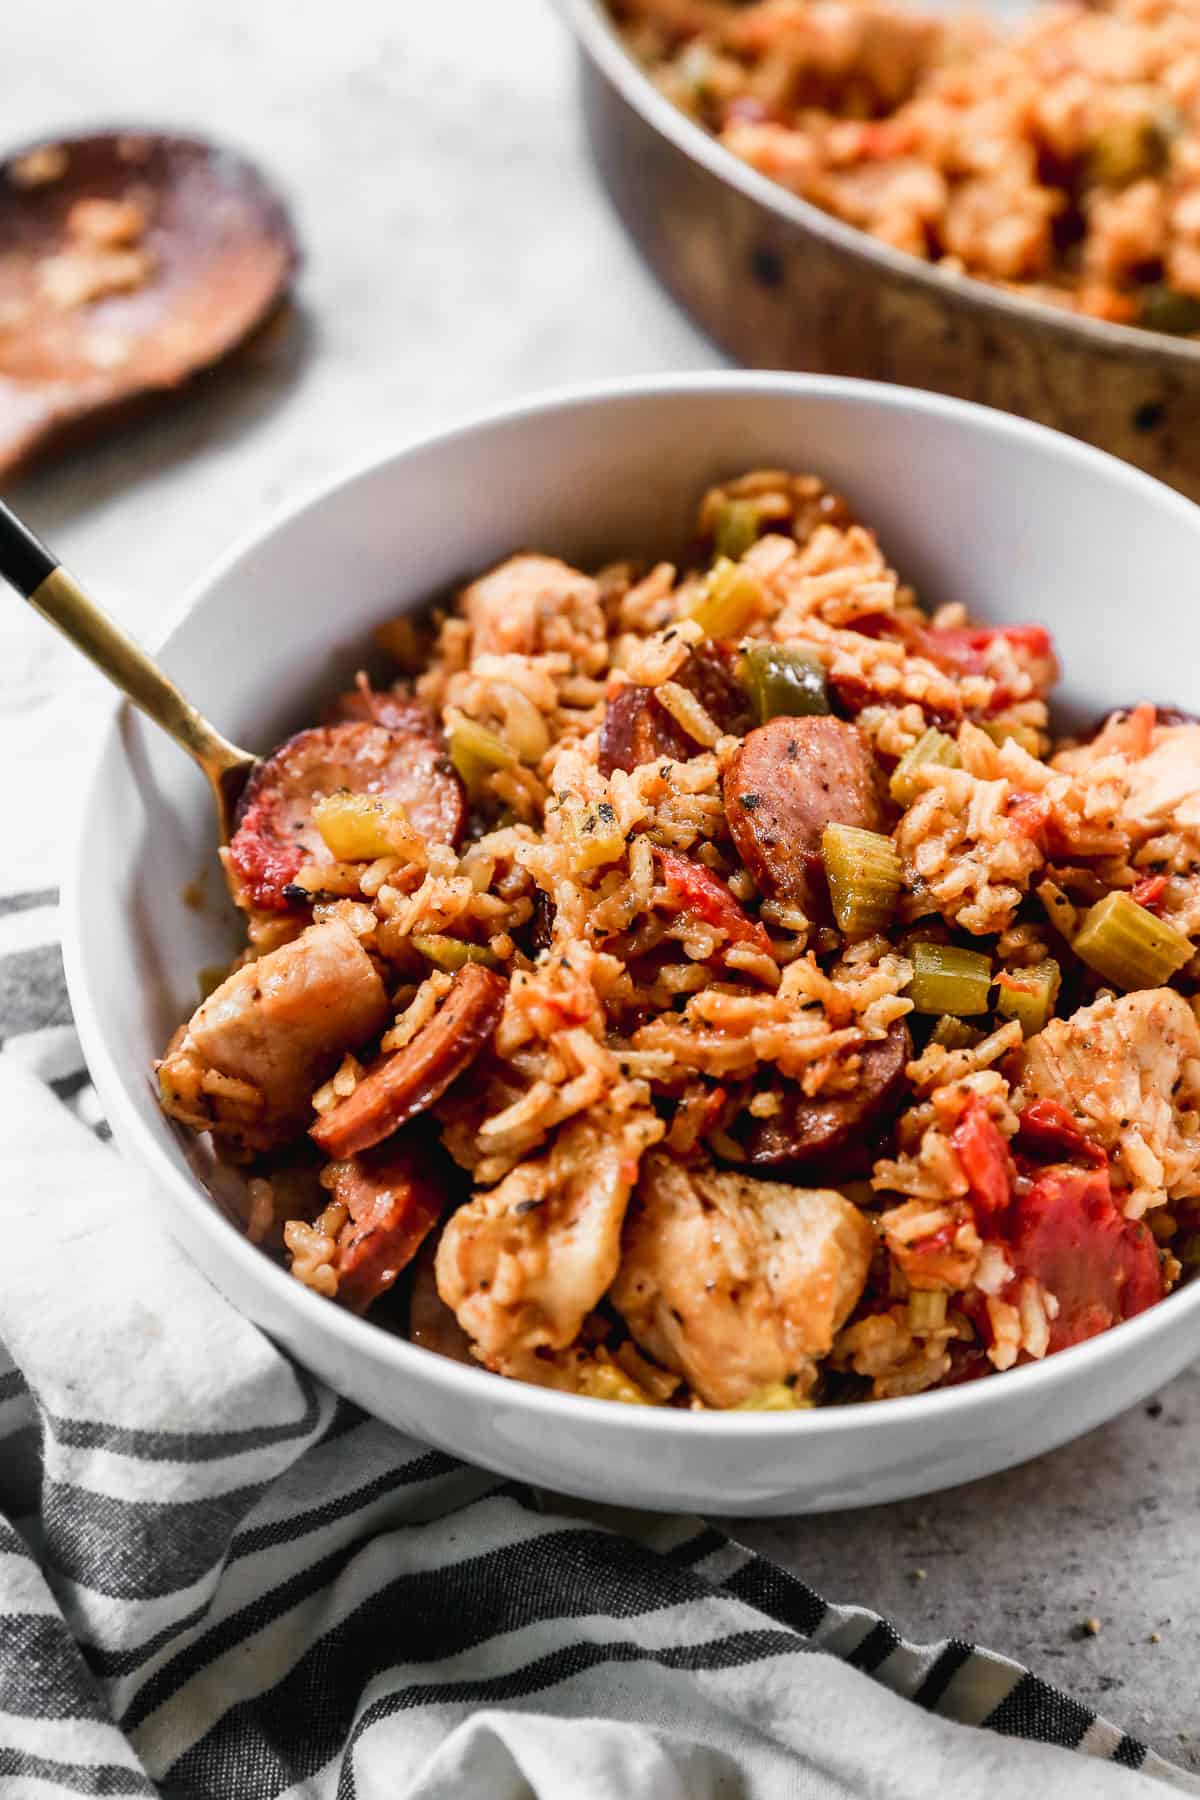 A bowl of homemade Jambalaya with chicken and sausage, ready to enjoy.